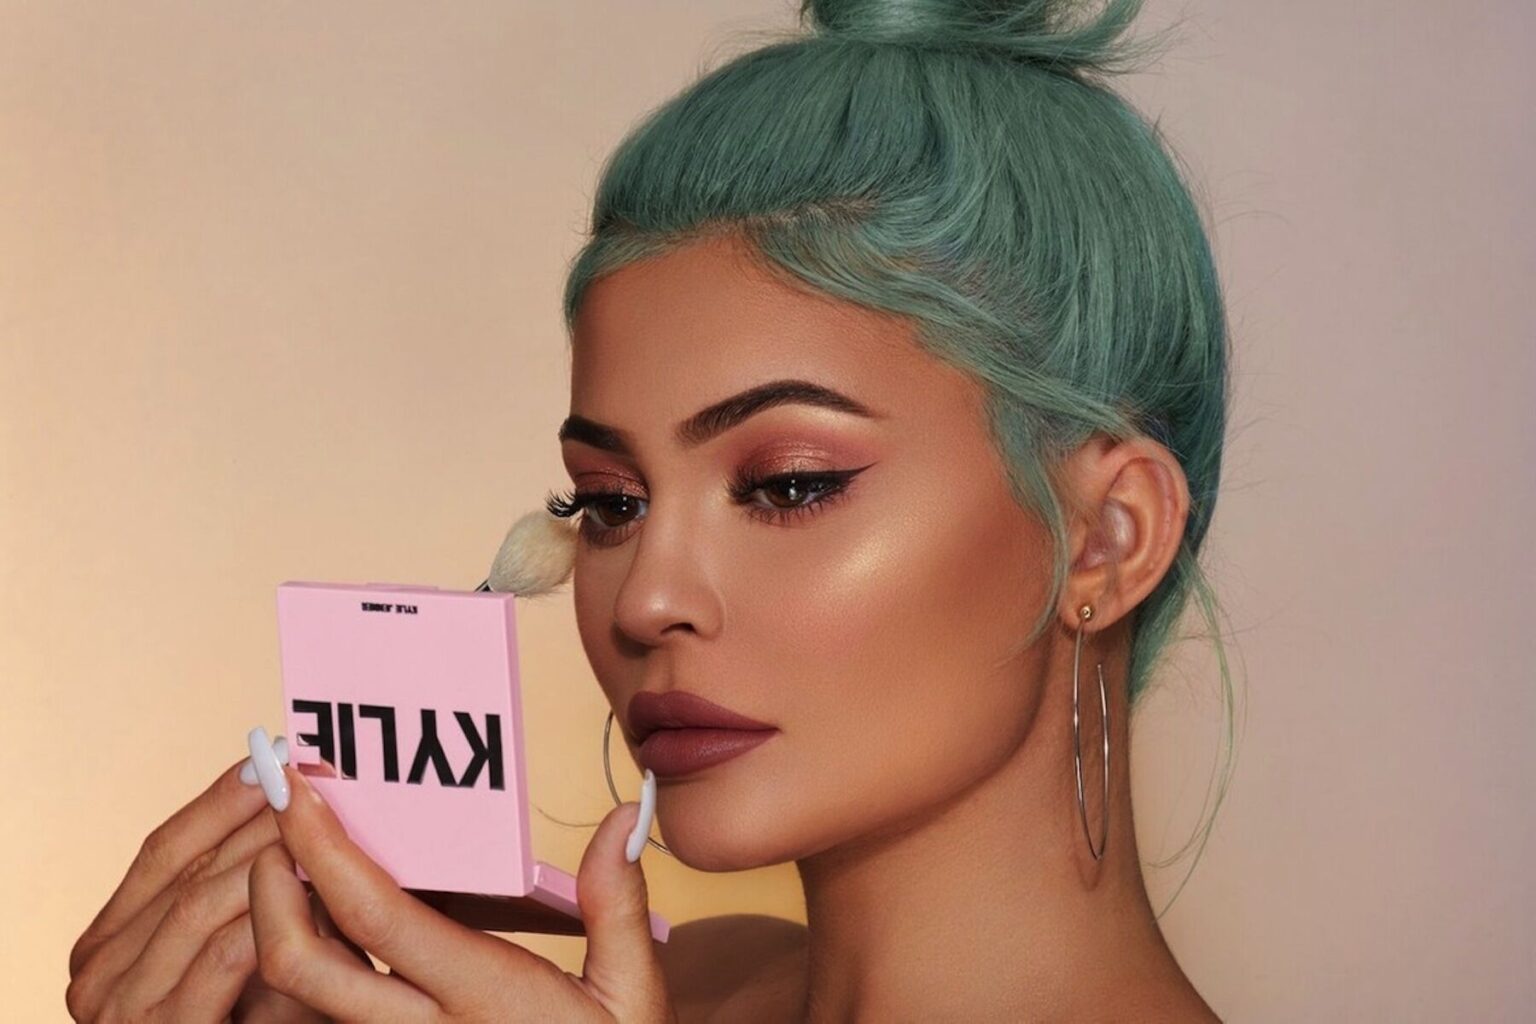 Kylie Jenner has built a significant chunk of her brand on being a “self-made billionaire.” How did Kylie Jenner earn her net worth?